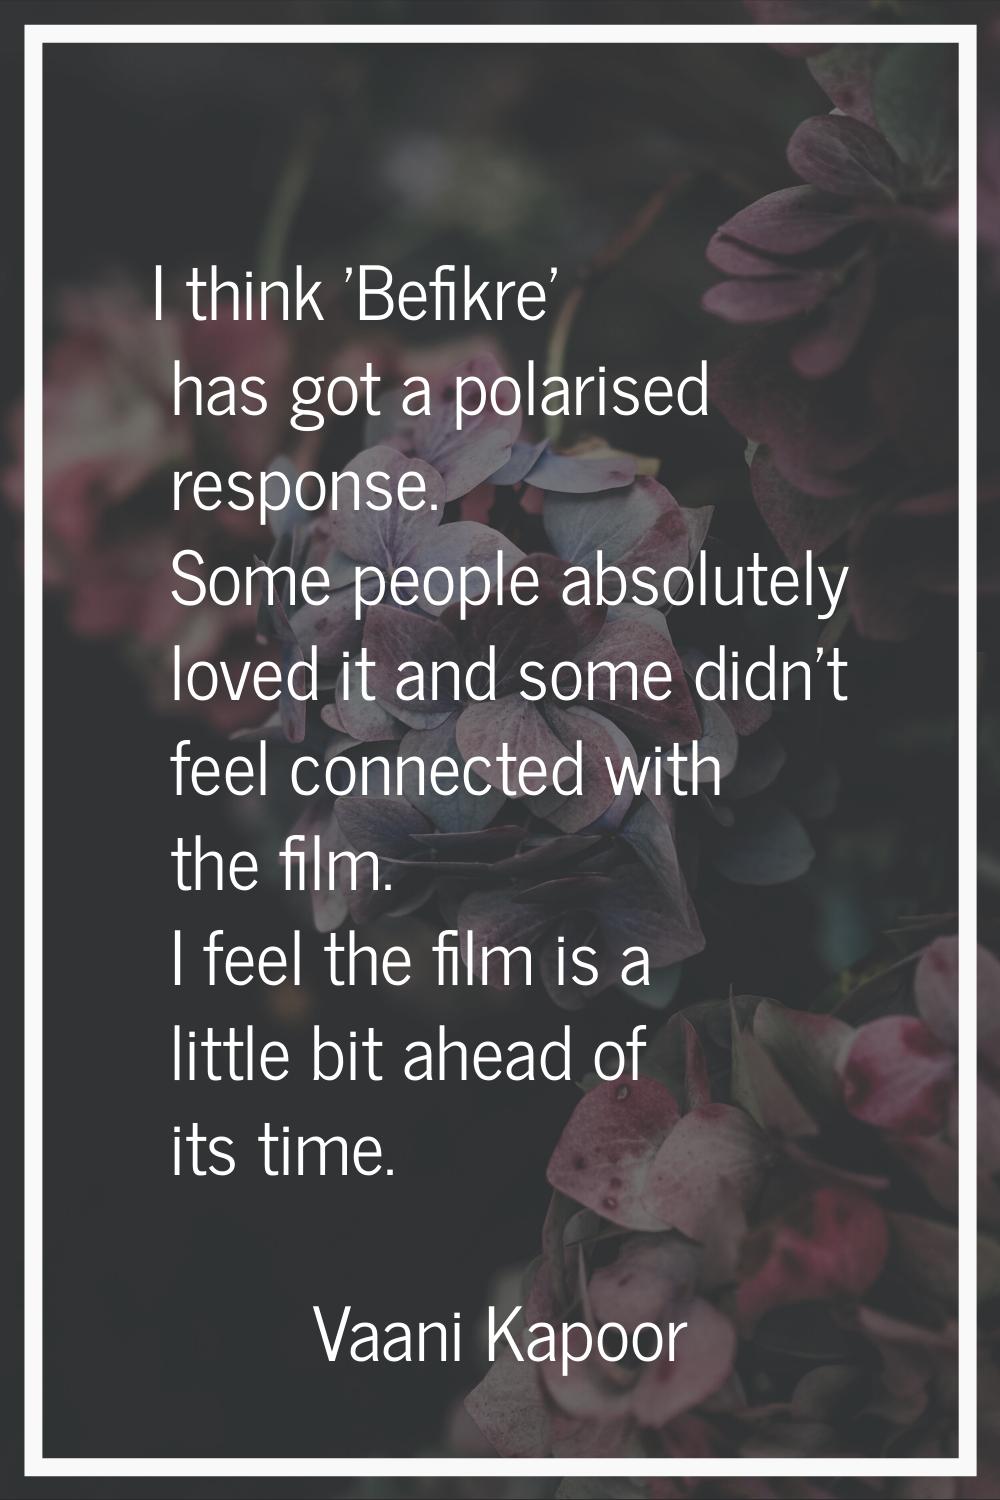 I think 'Befikre' has got a polarised response. Some people absolutely loved it and some didn't fee